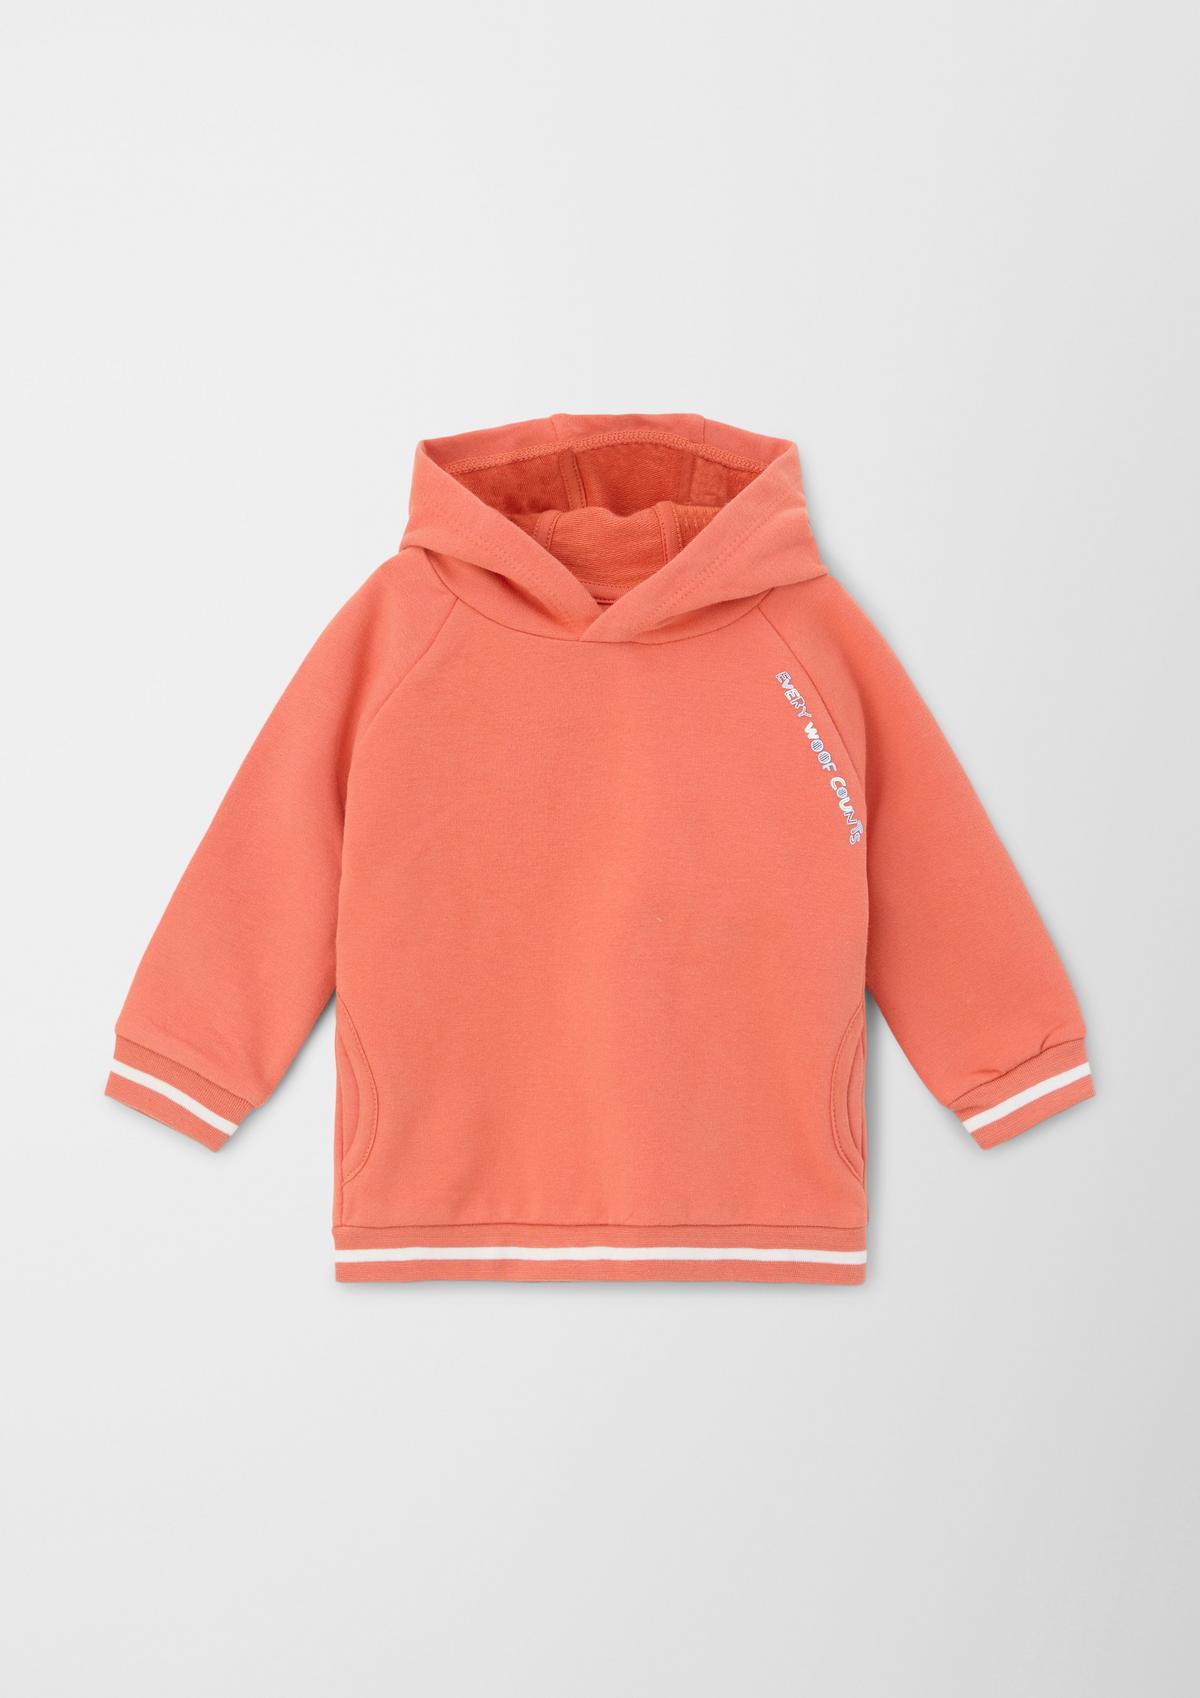 s.Oliver Hooded sweatshirt with a back print